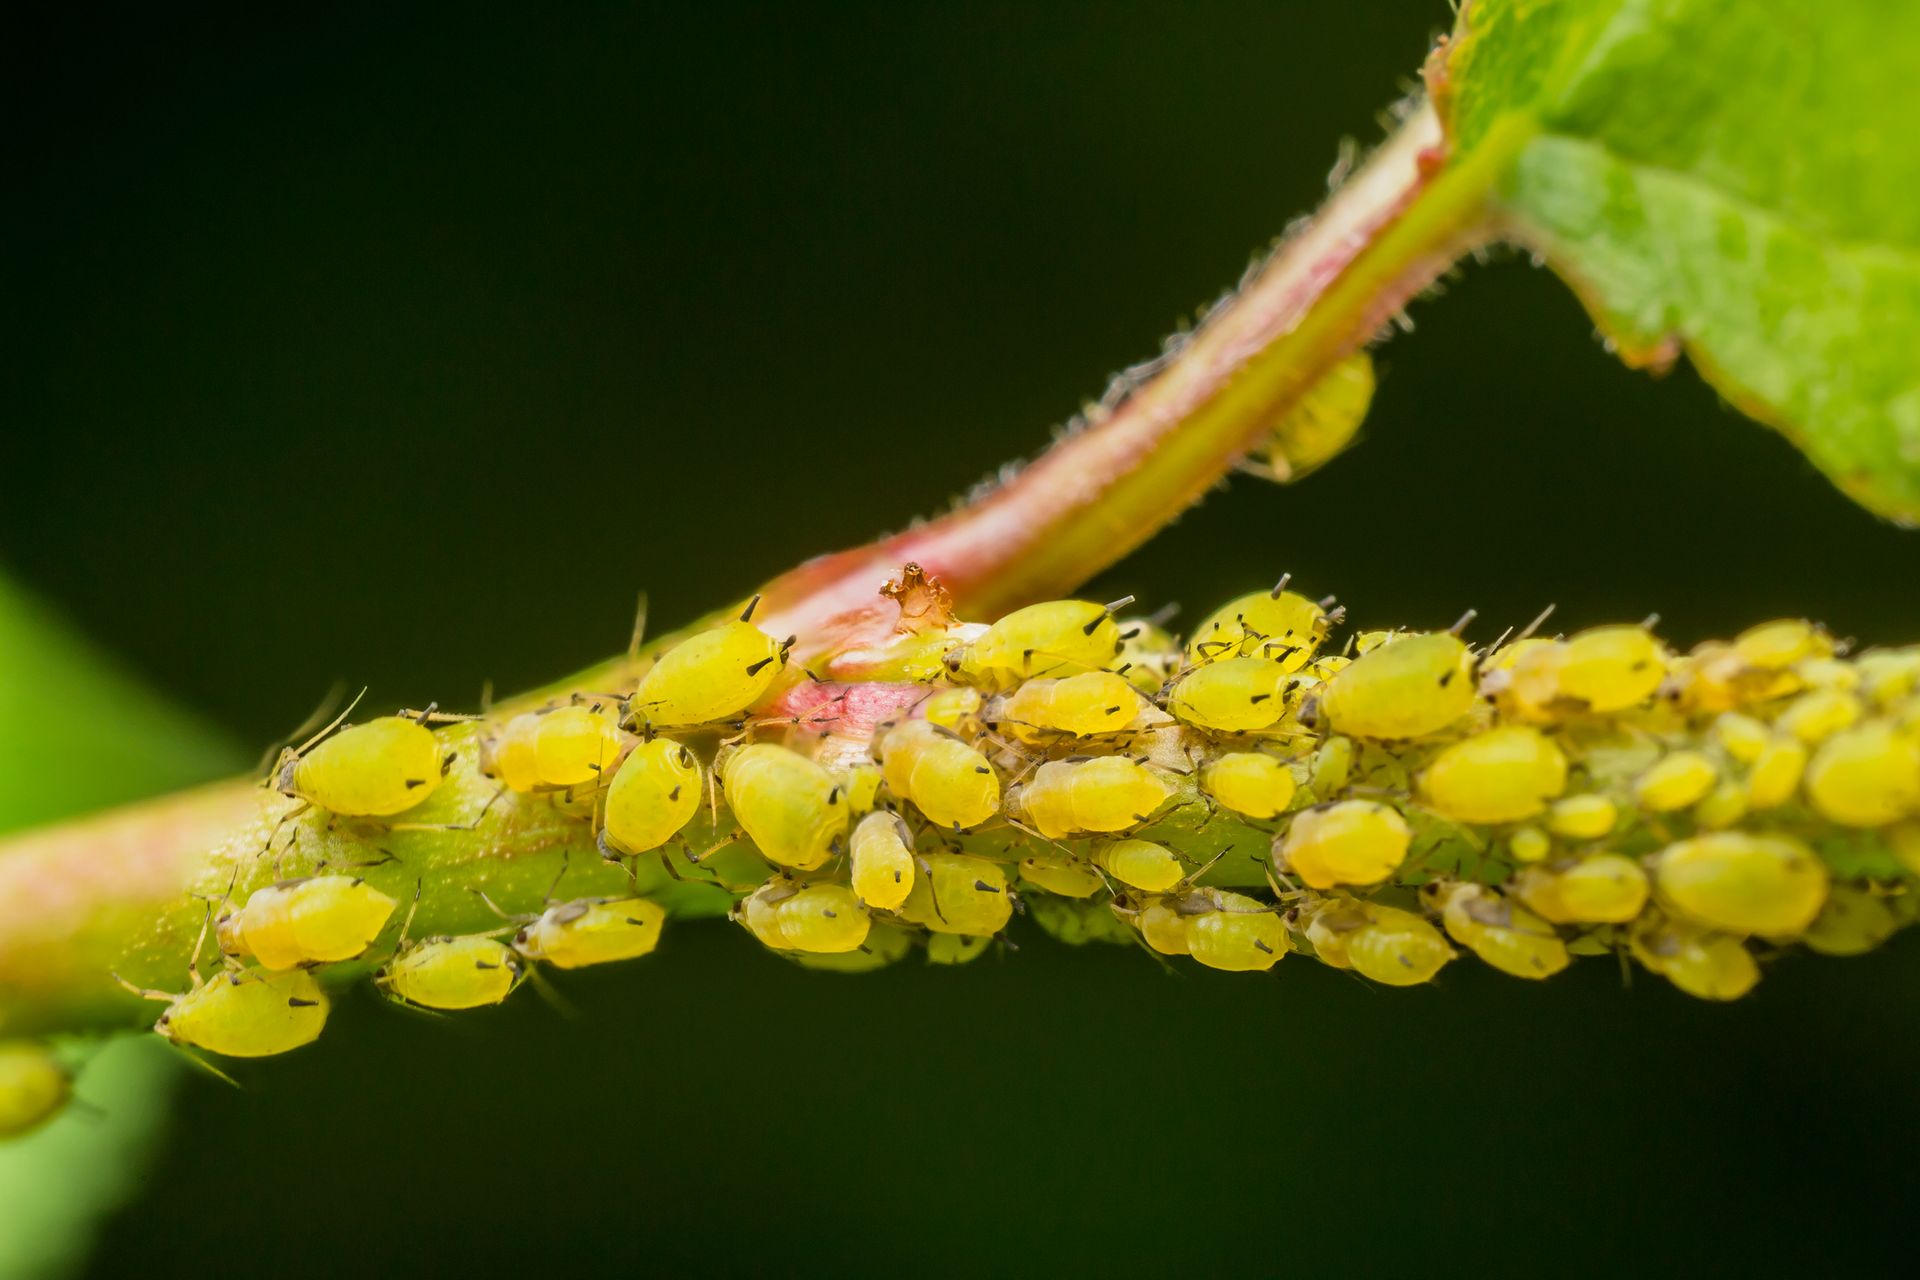 What do aphids look like